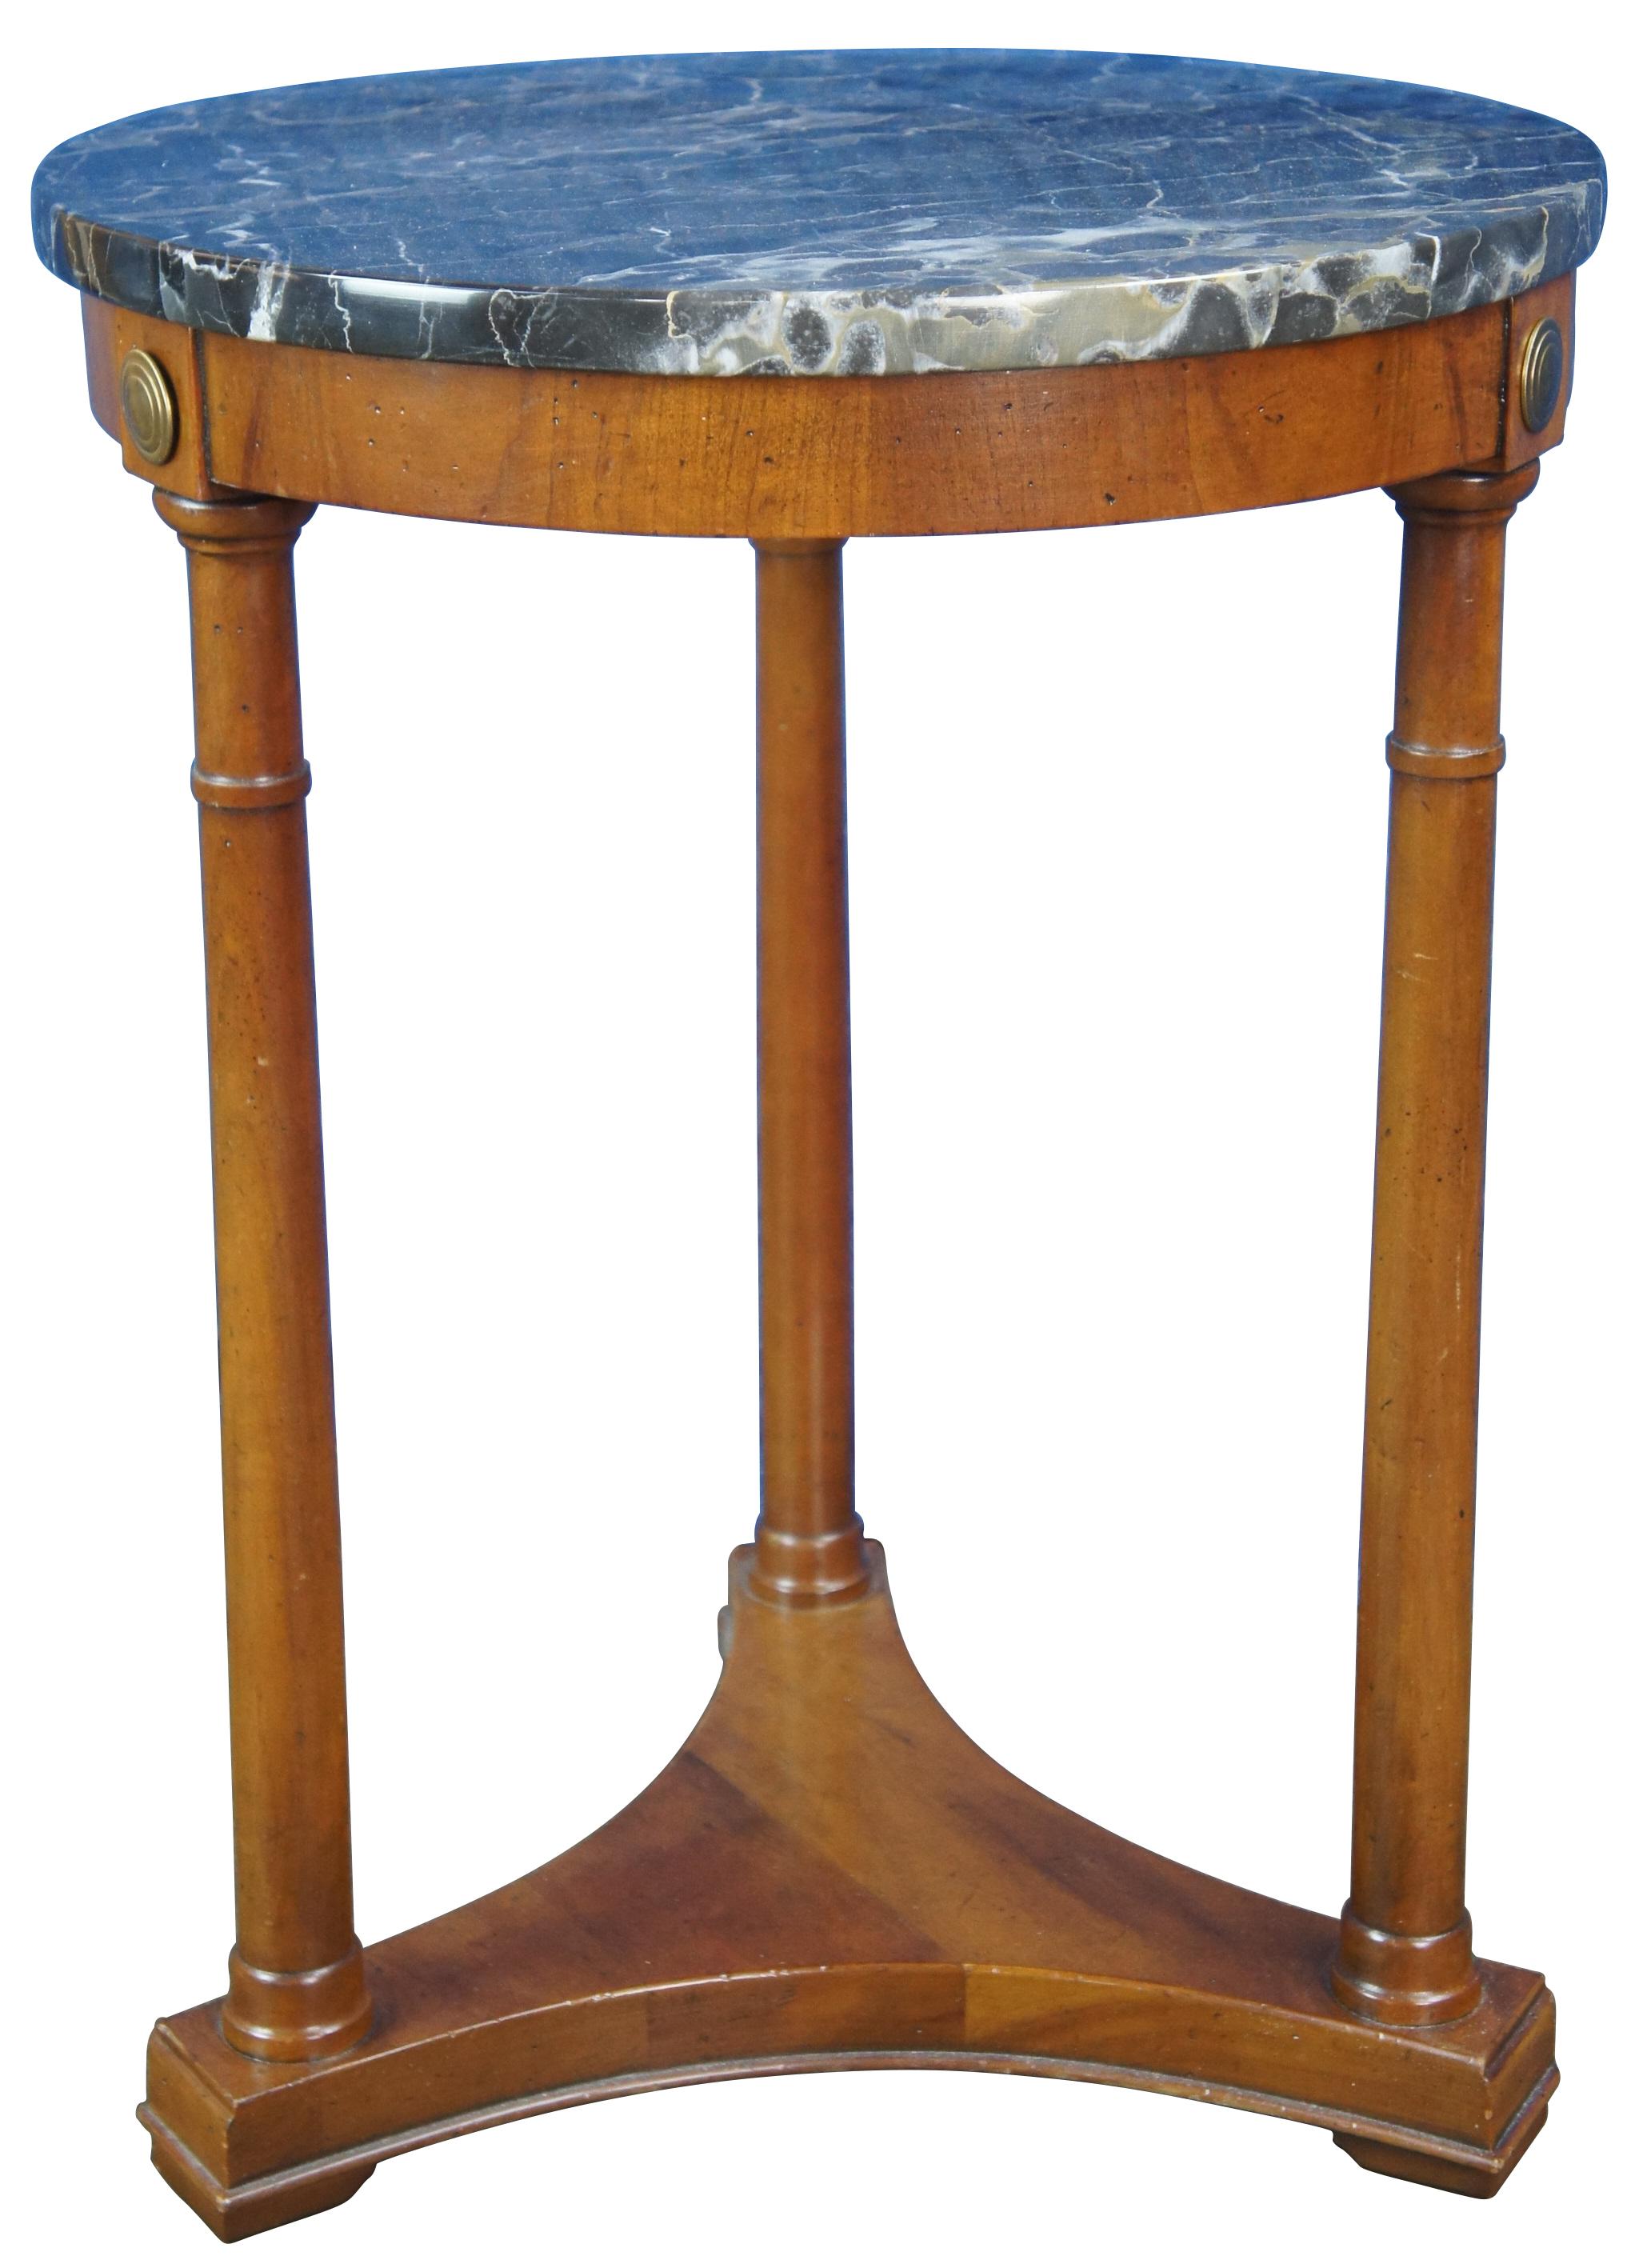 Mid Century Fine Arts Furniture Company Gueridon side table or plant stand. Made of cherry featuring round form with Italian marble top, three turned columns and triangular base. Marked Italy on base of marble and Fine Arts Furniture Co,